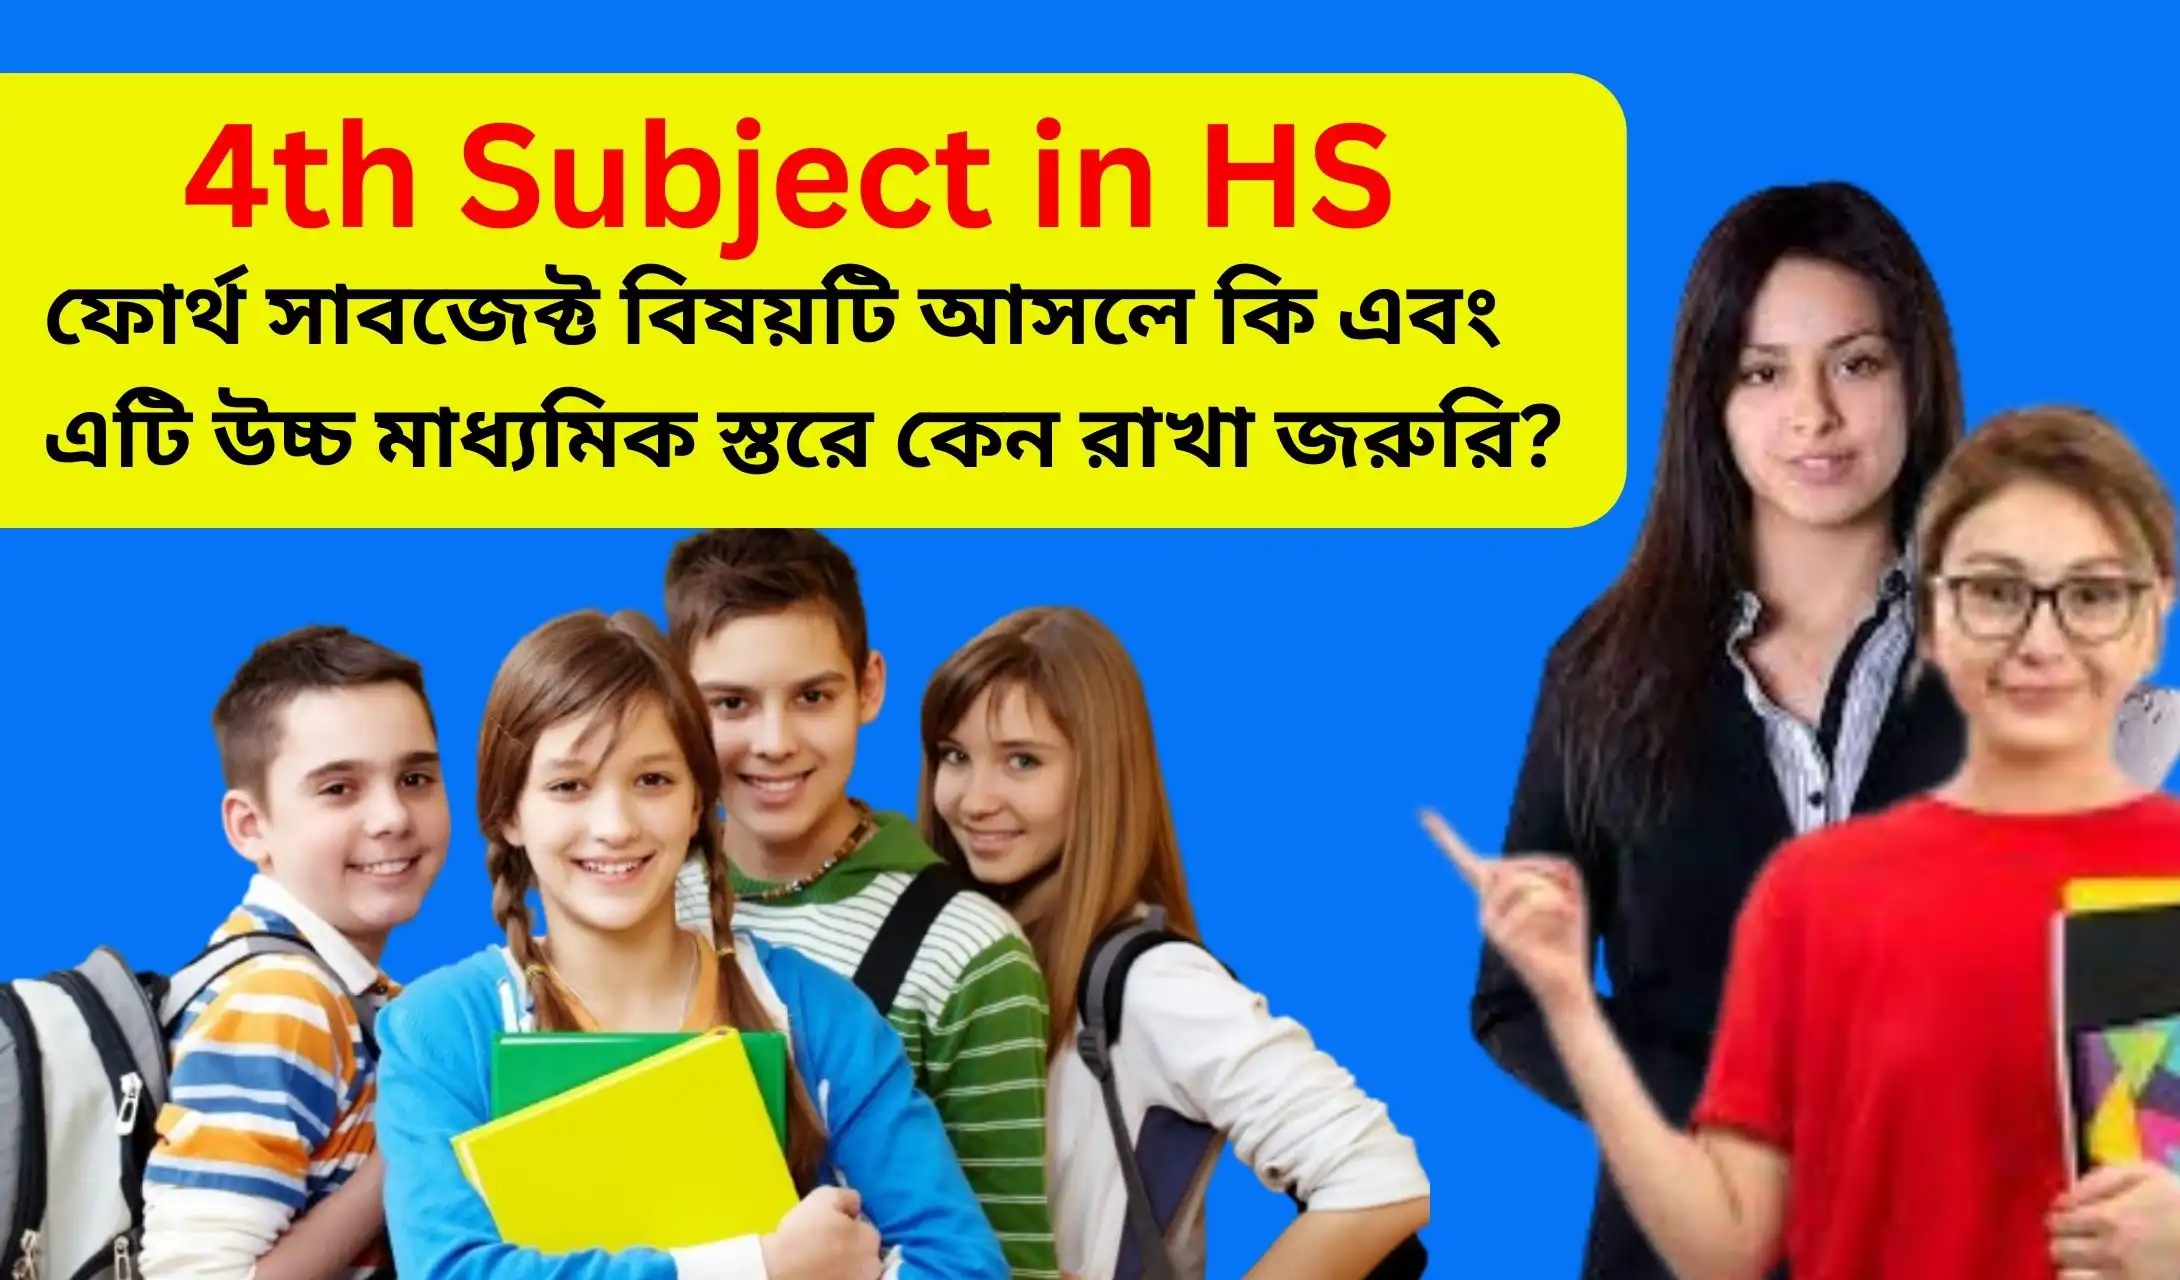 WBCHSE 4th Subject in HS